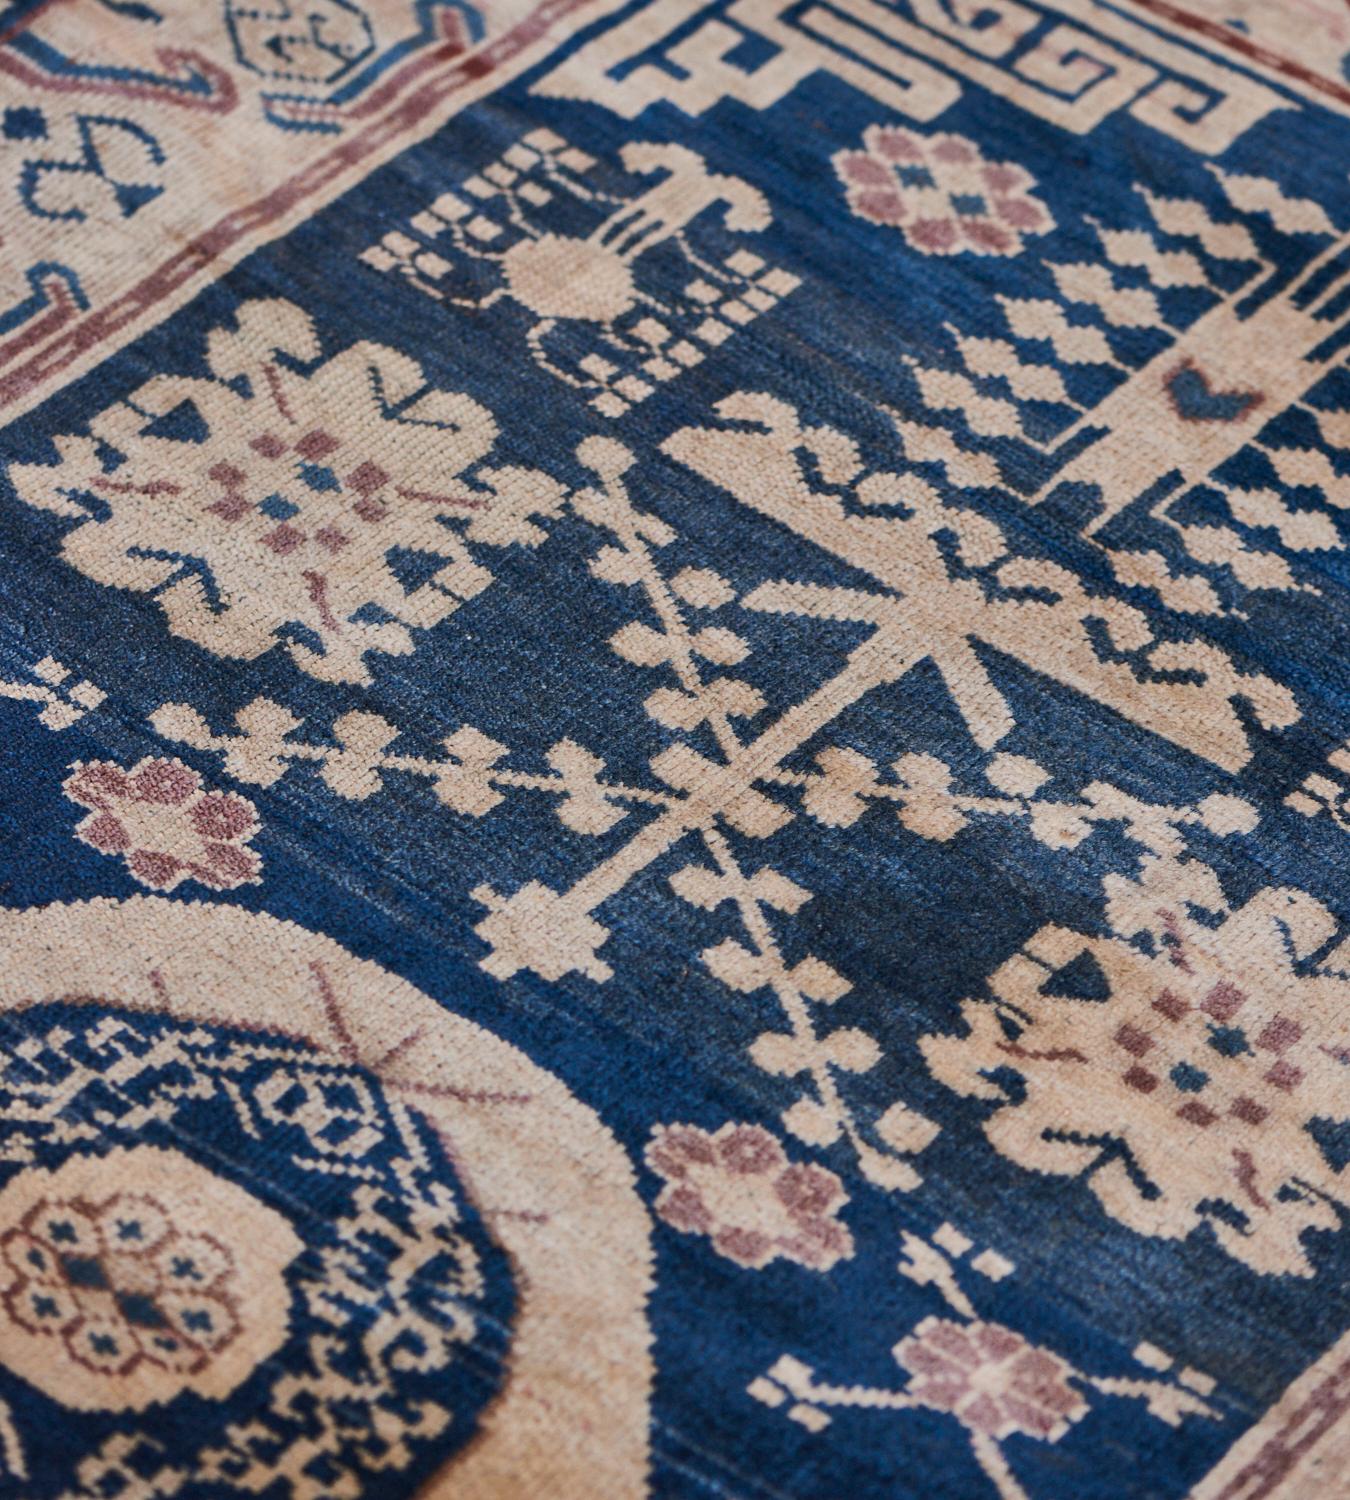 This traditional Khotan rug has a shaded navy blue field scattered with floral sprays, hooked floral motifs, and other auspicious designs around central beige roundel containing a flowing vine around a stellar flowerhead, there are stepped angular